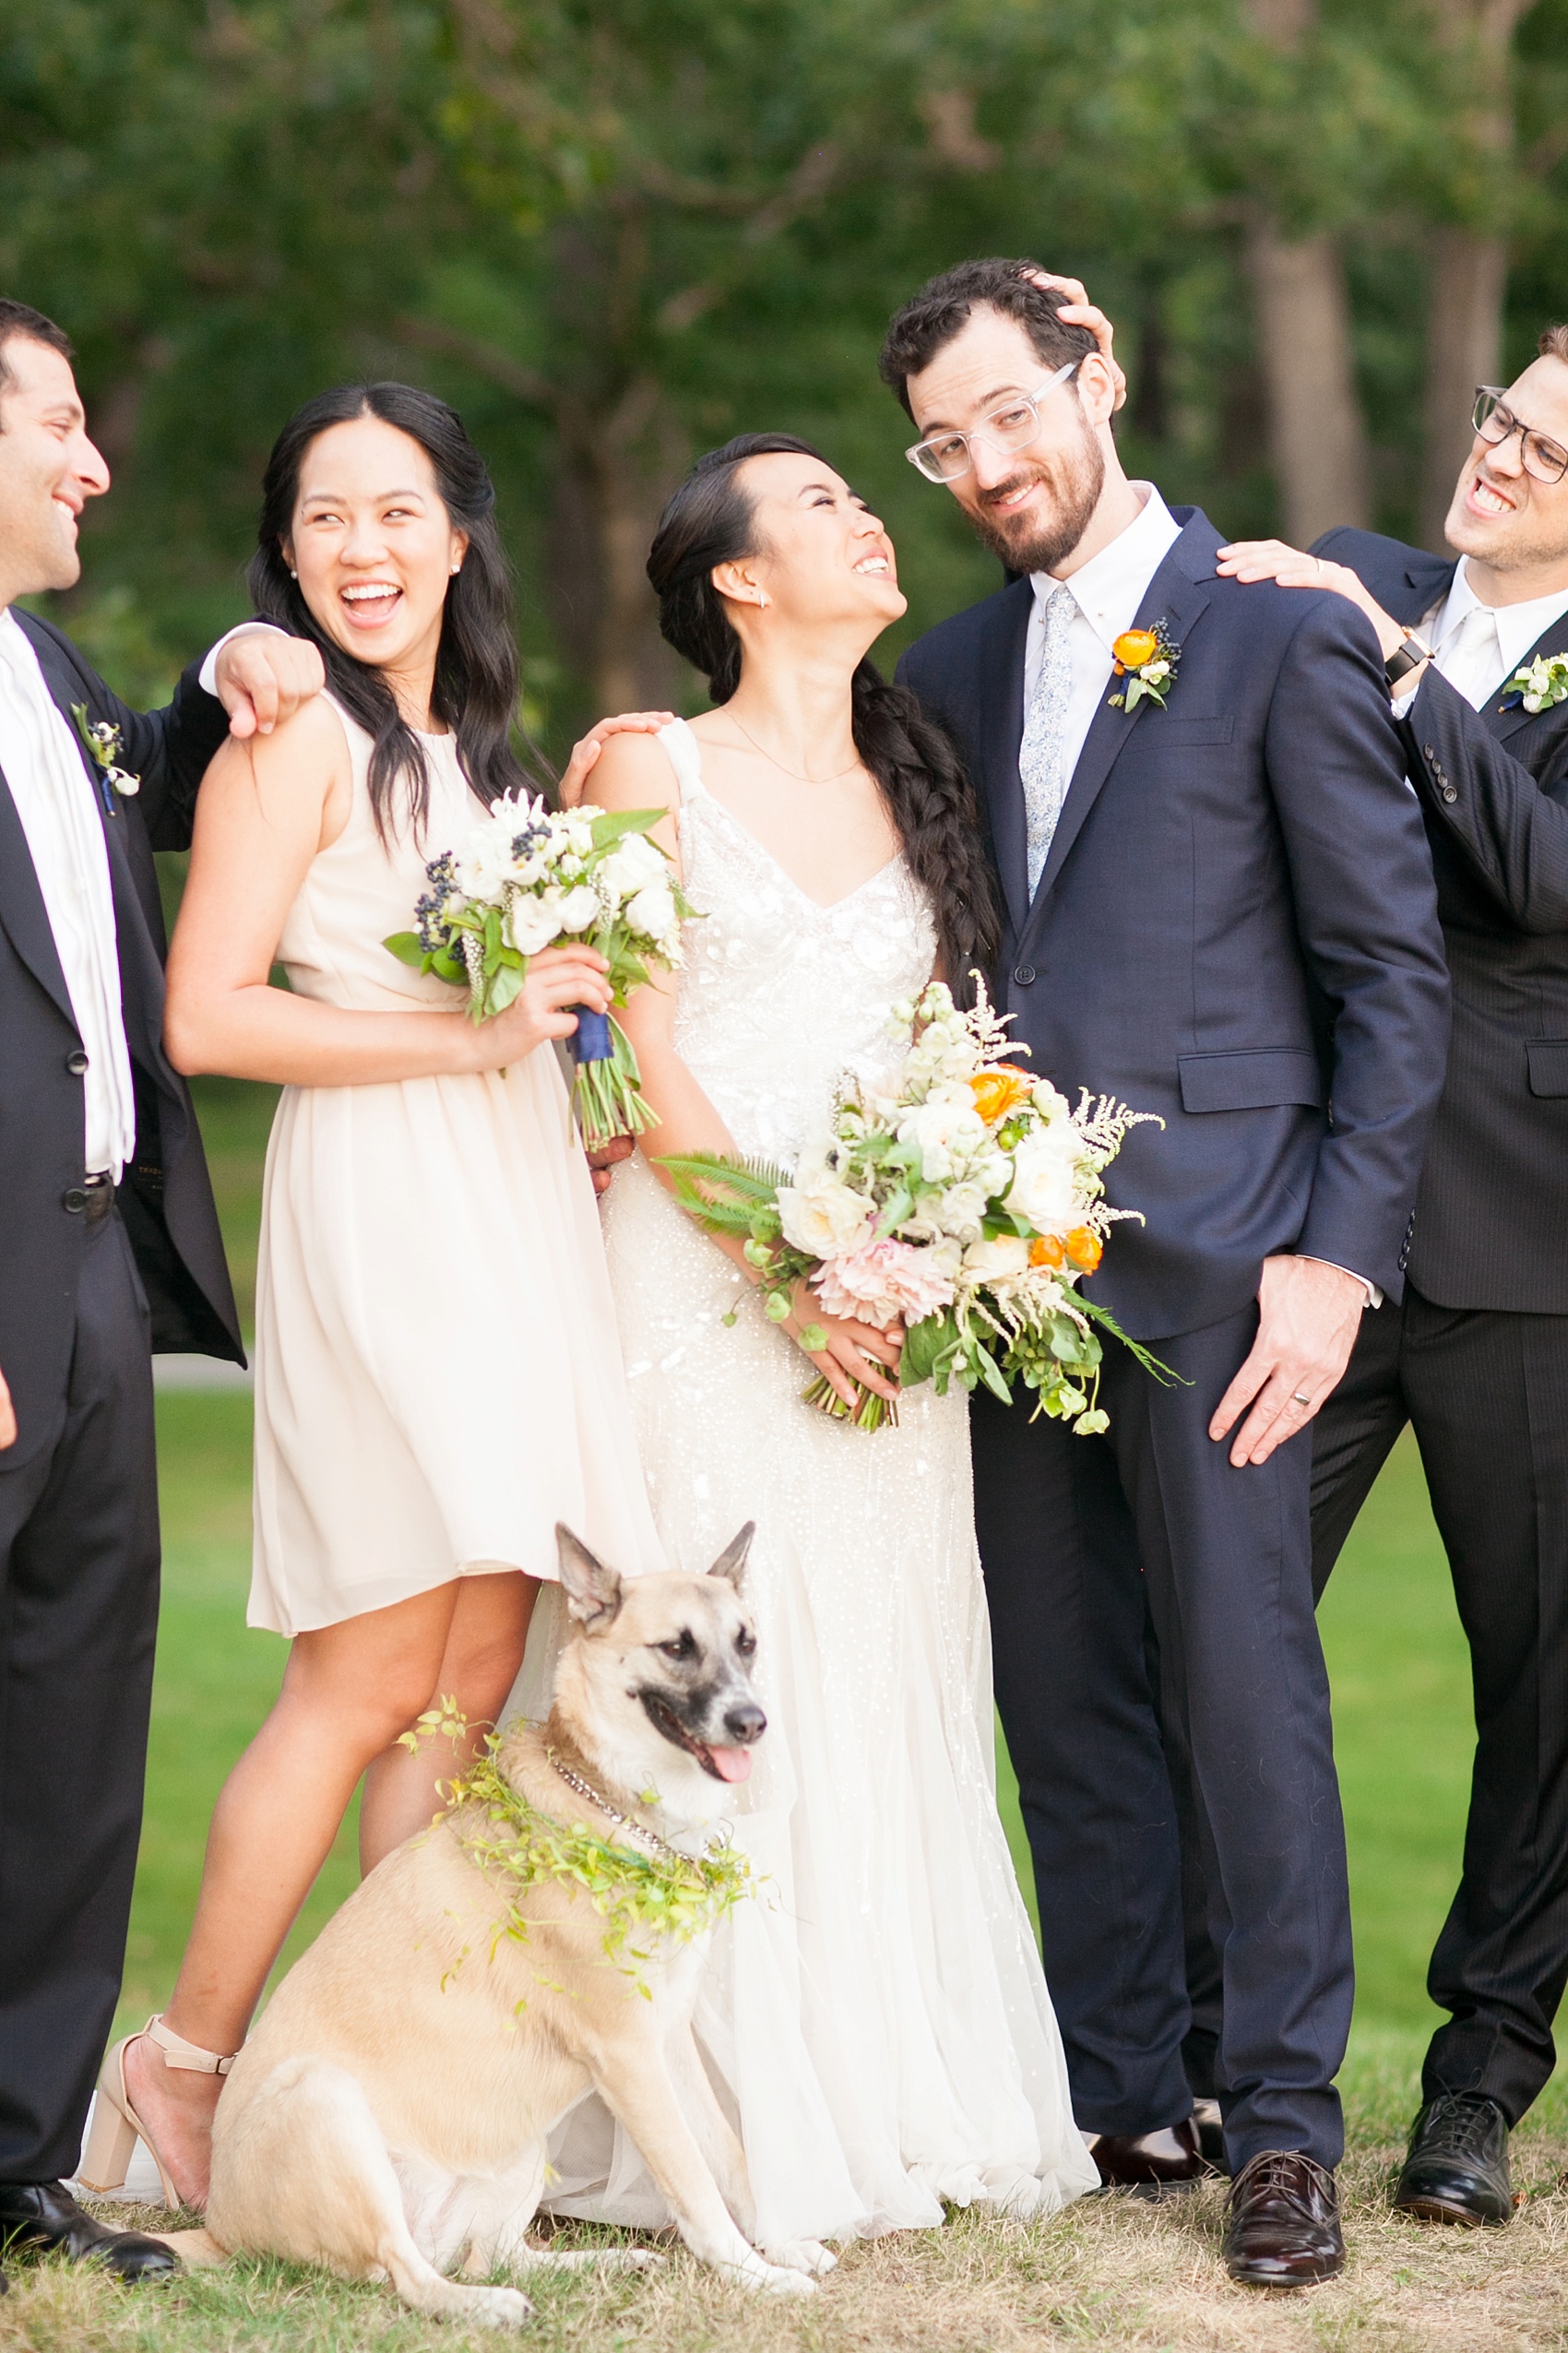 NY wedding at Southwood Estate. Images by Mikkel Paige Photography, NYC wedding photographer. Cream and blush bridesmaids and wildflower bouquets of white, blue, green and orange by Sachi Rose. Beaded wedding gown and groomsmen in navy suits.